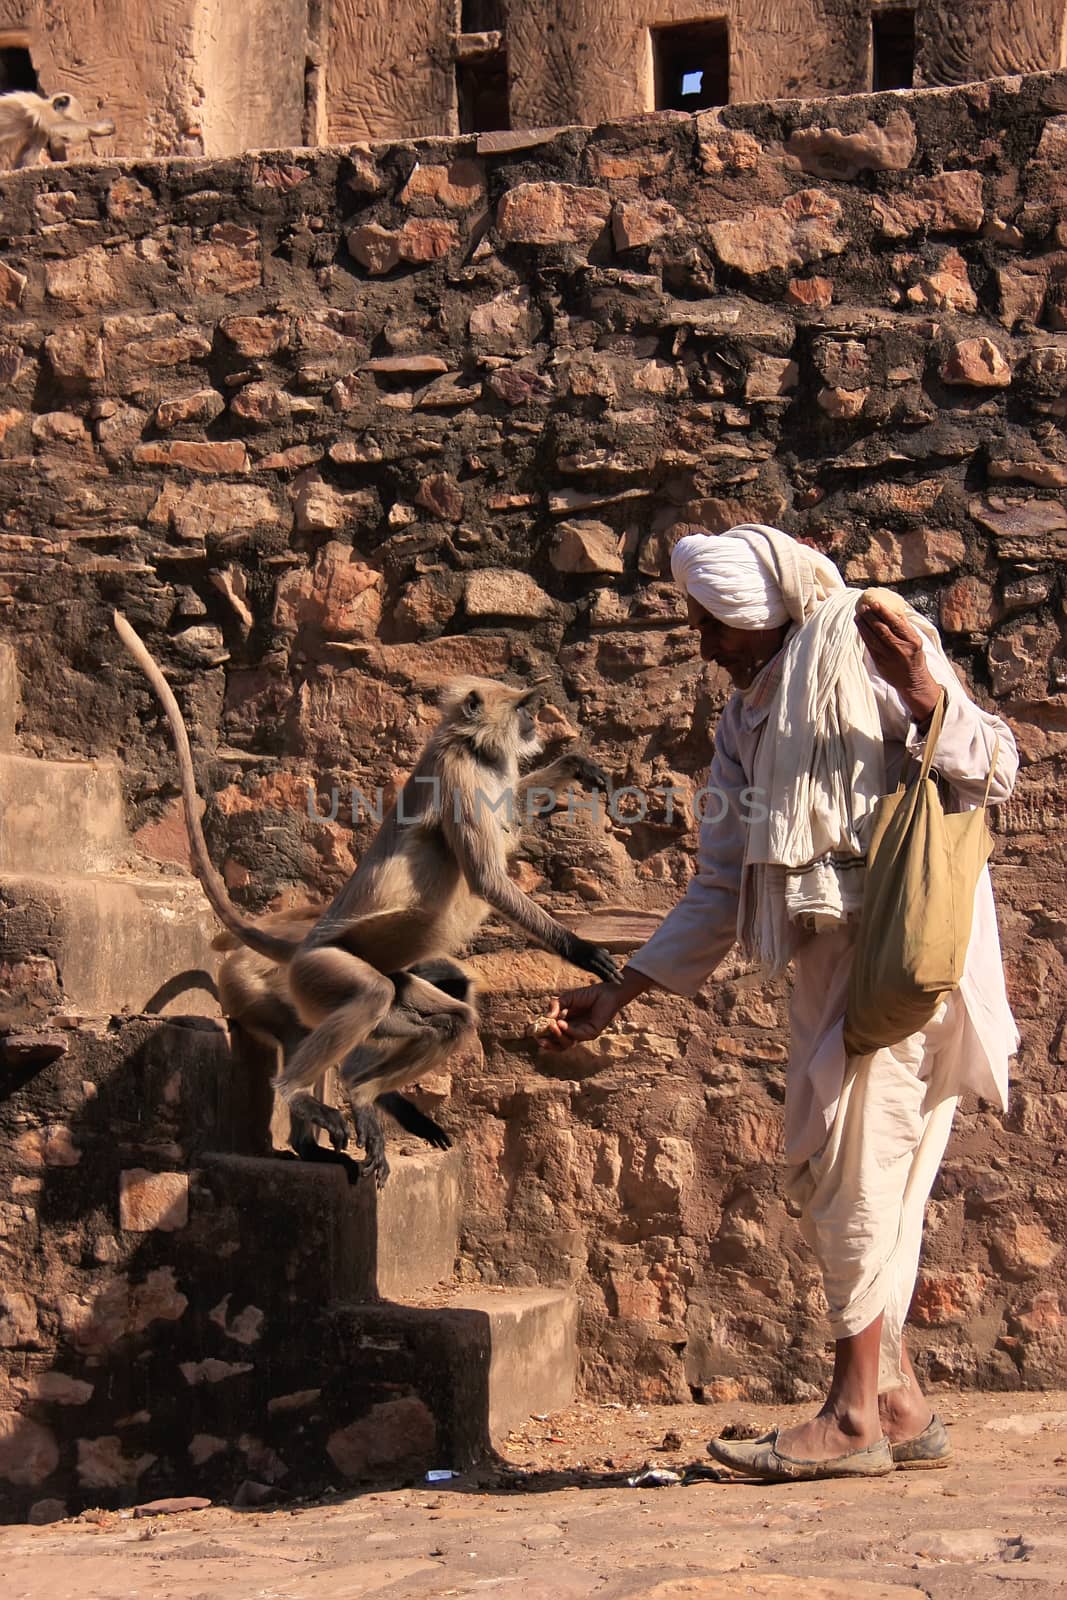 Indian man feeding gray langurs at Ranthambore Fort, India by donya_nedomam